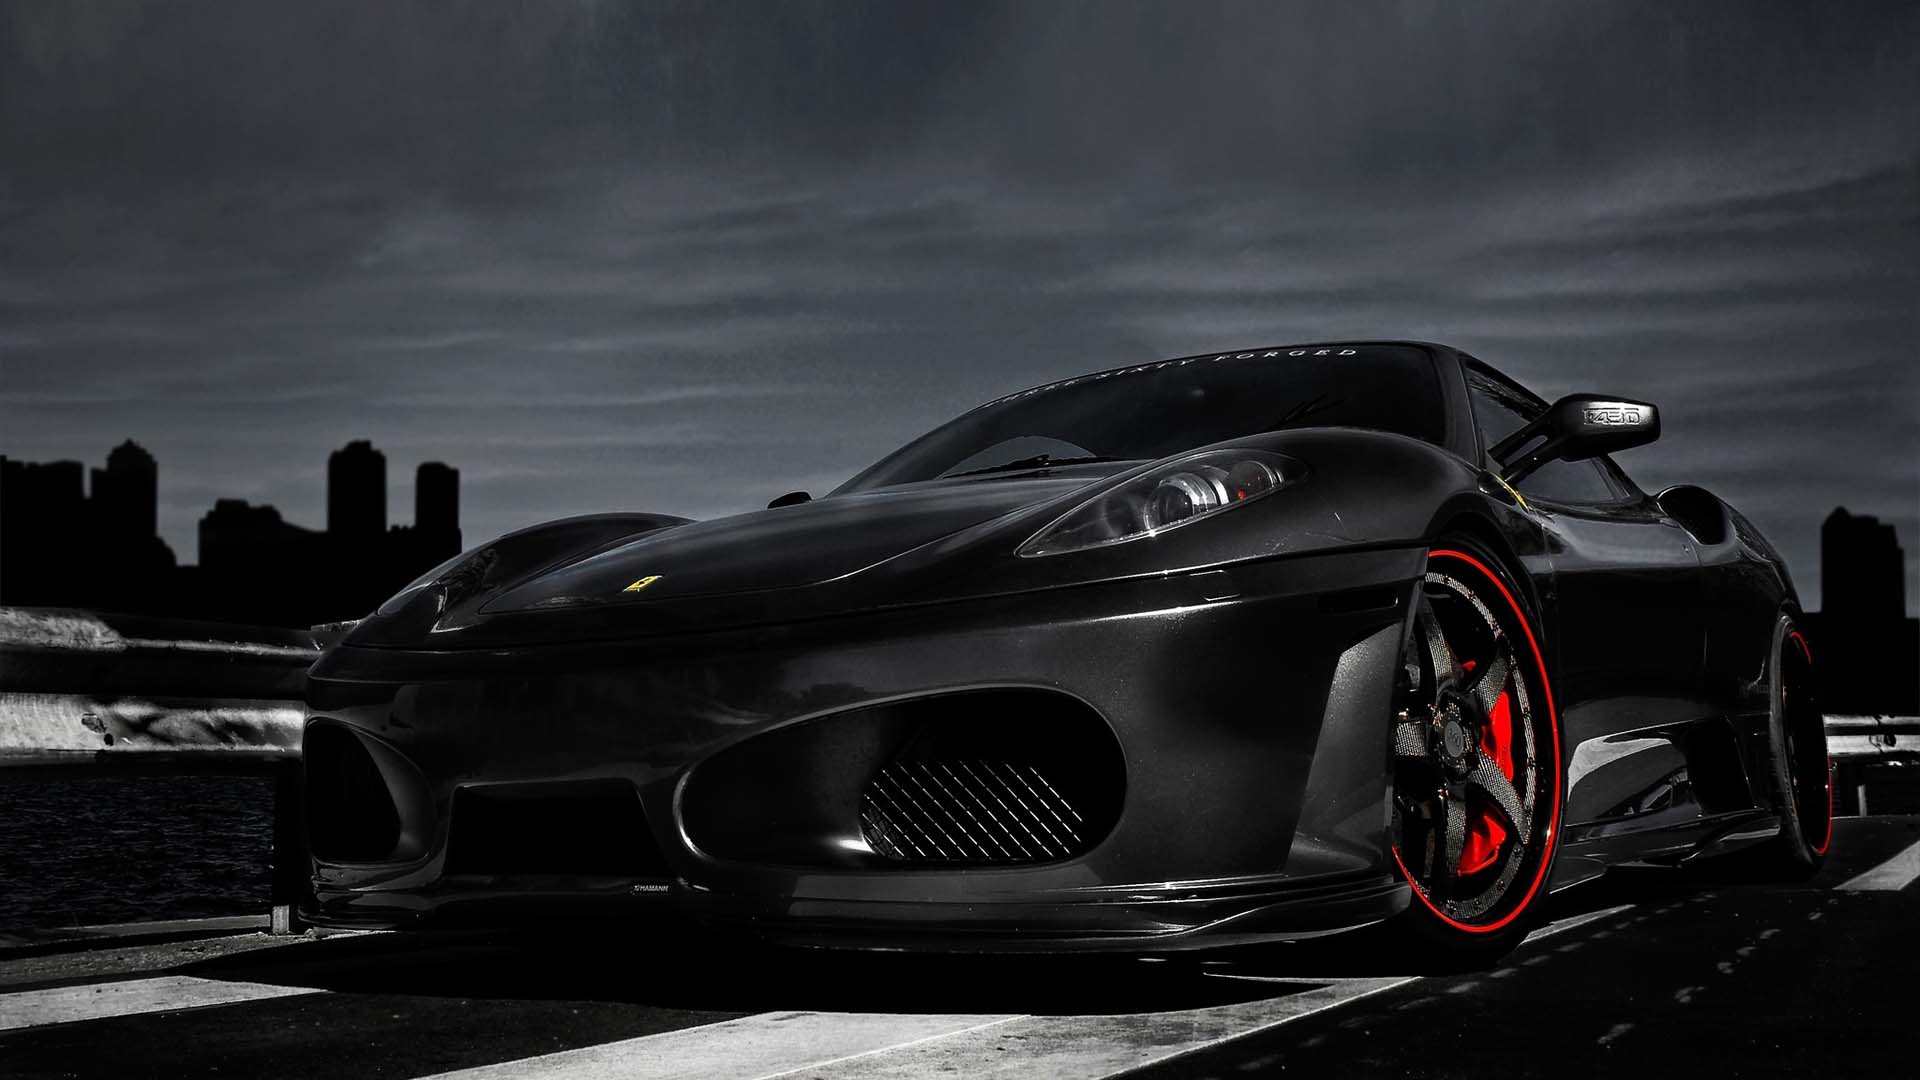  to Coolest Collection of Ferrari Wallpaper Backgrounds In HD 1920x1080